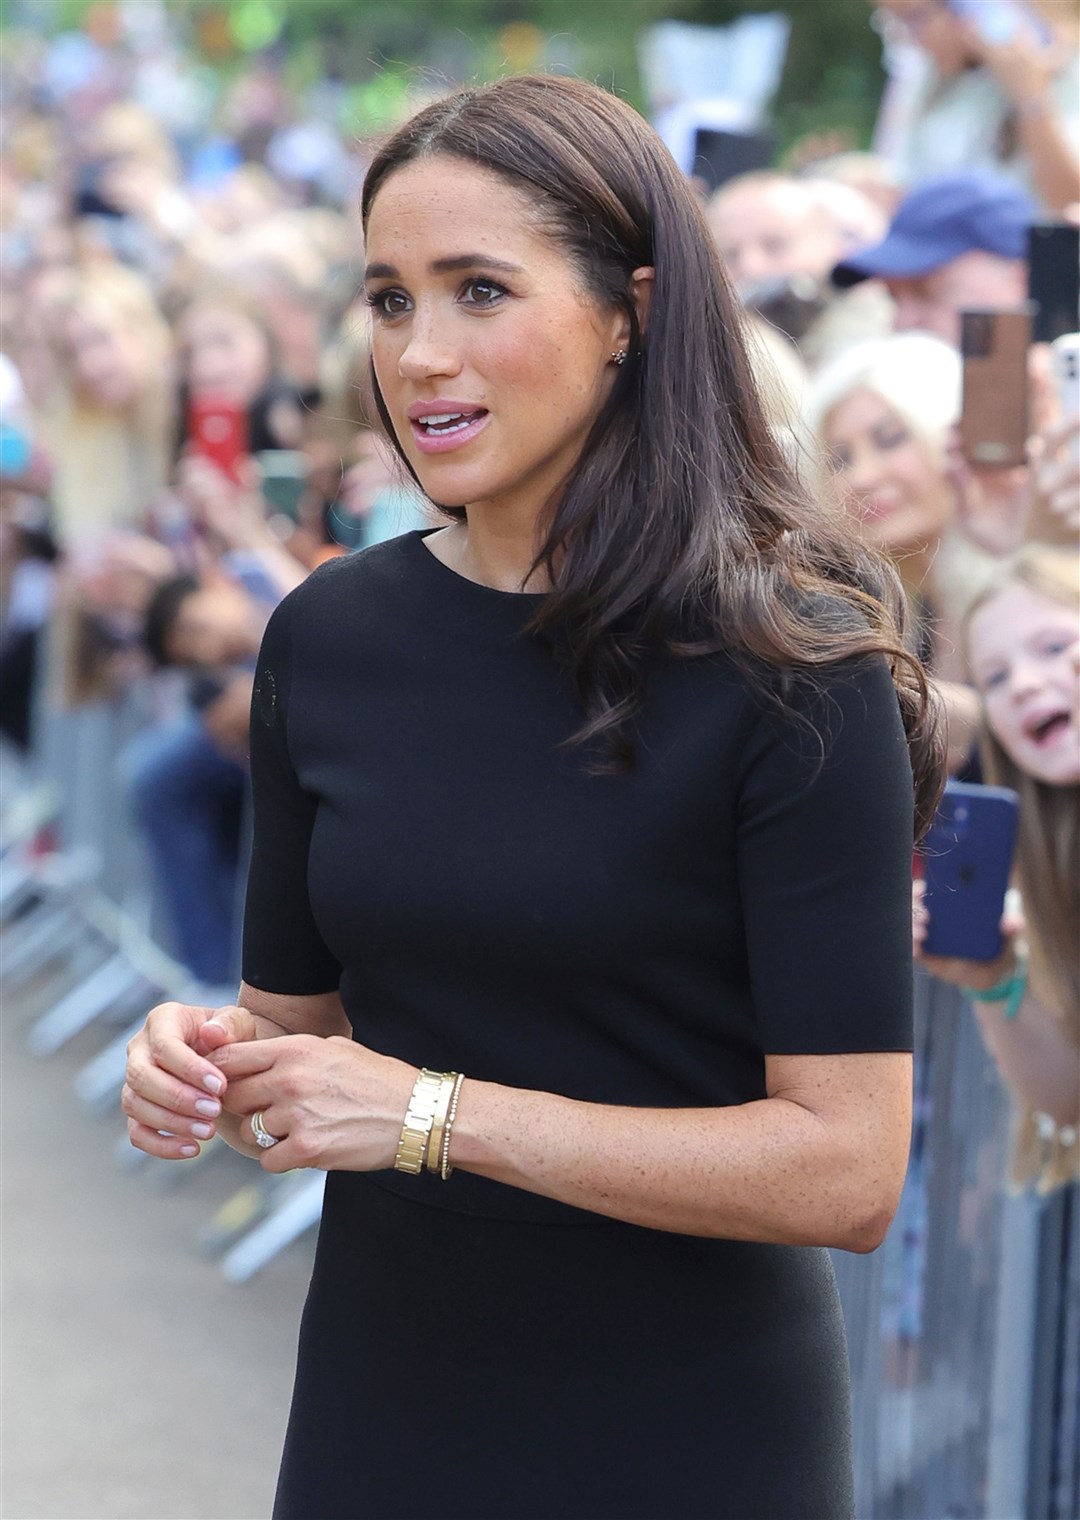 The Duchess of Sussex meeting members of the public at Windsor Castle following the death of the Queen (Chris Jackson/PA)